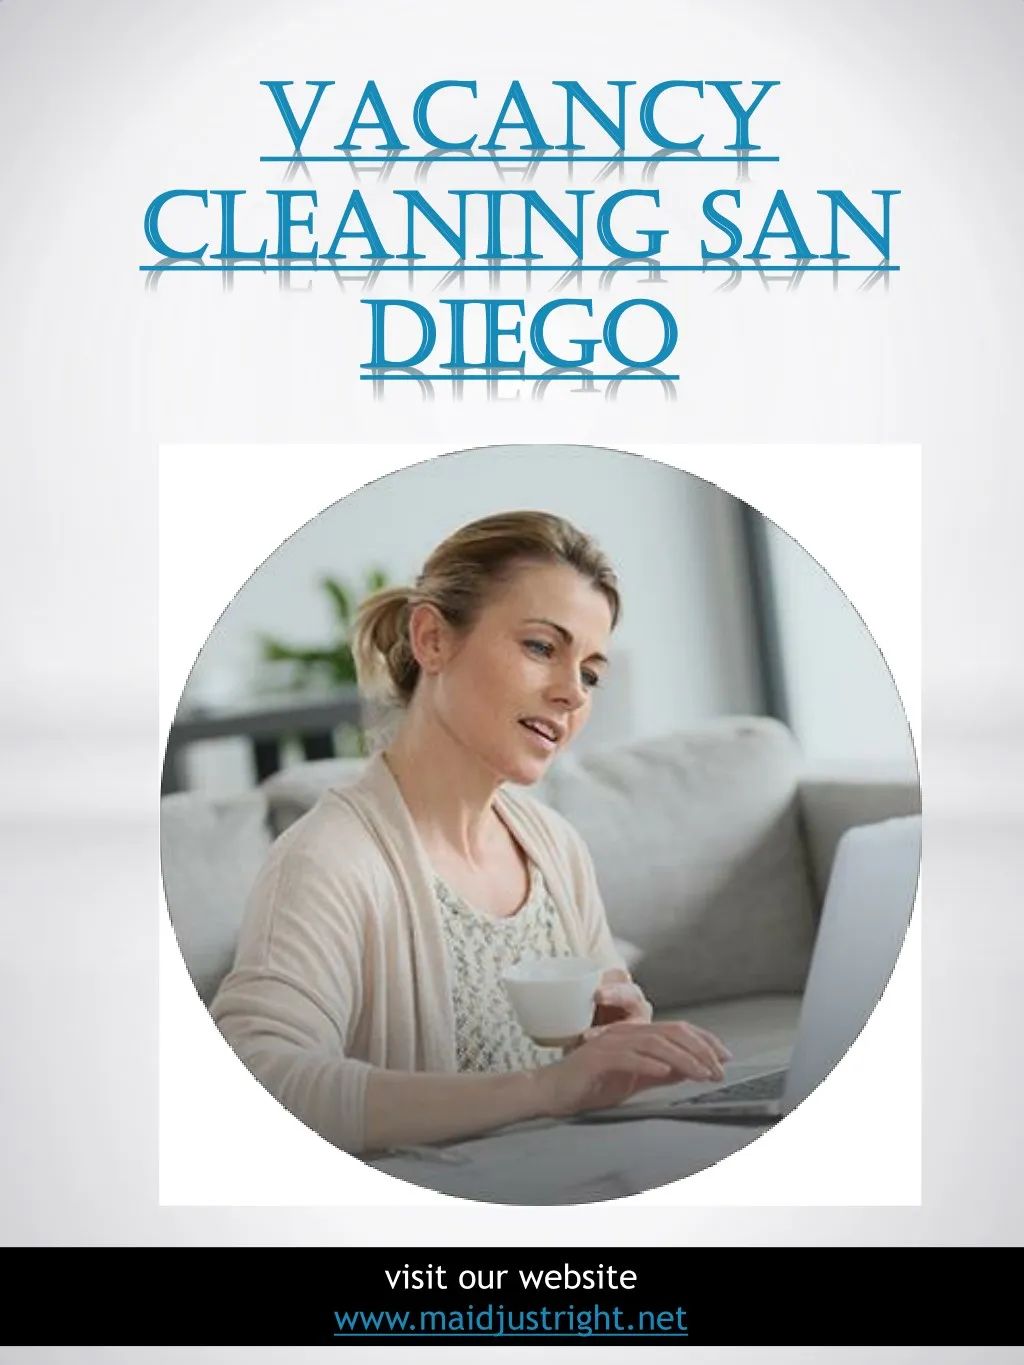 vacancy vacancy cleaning san cleaning san diego